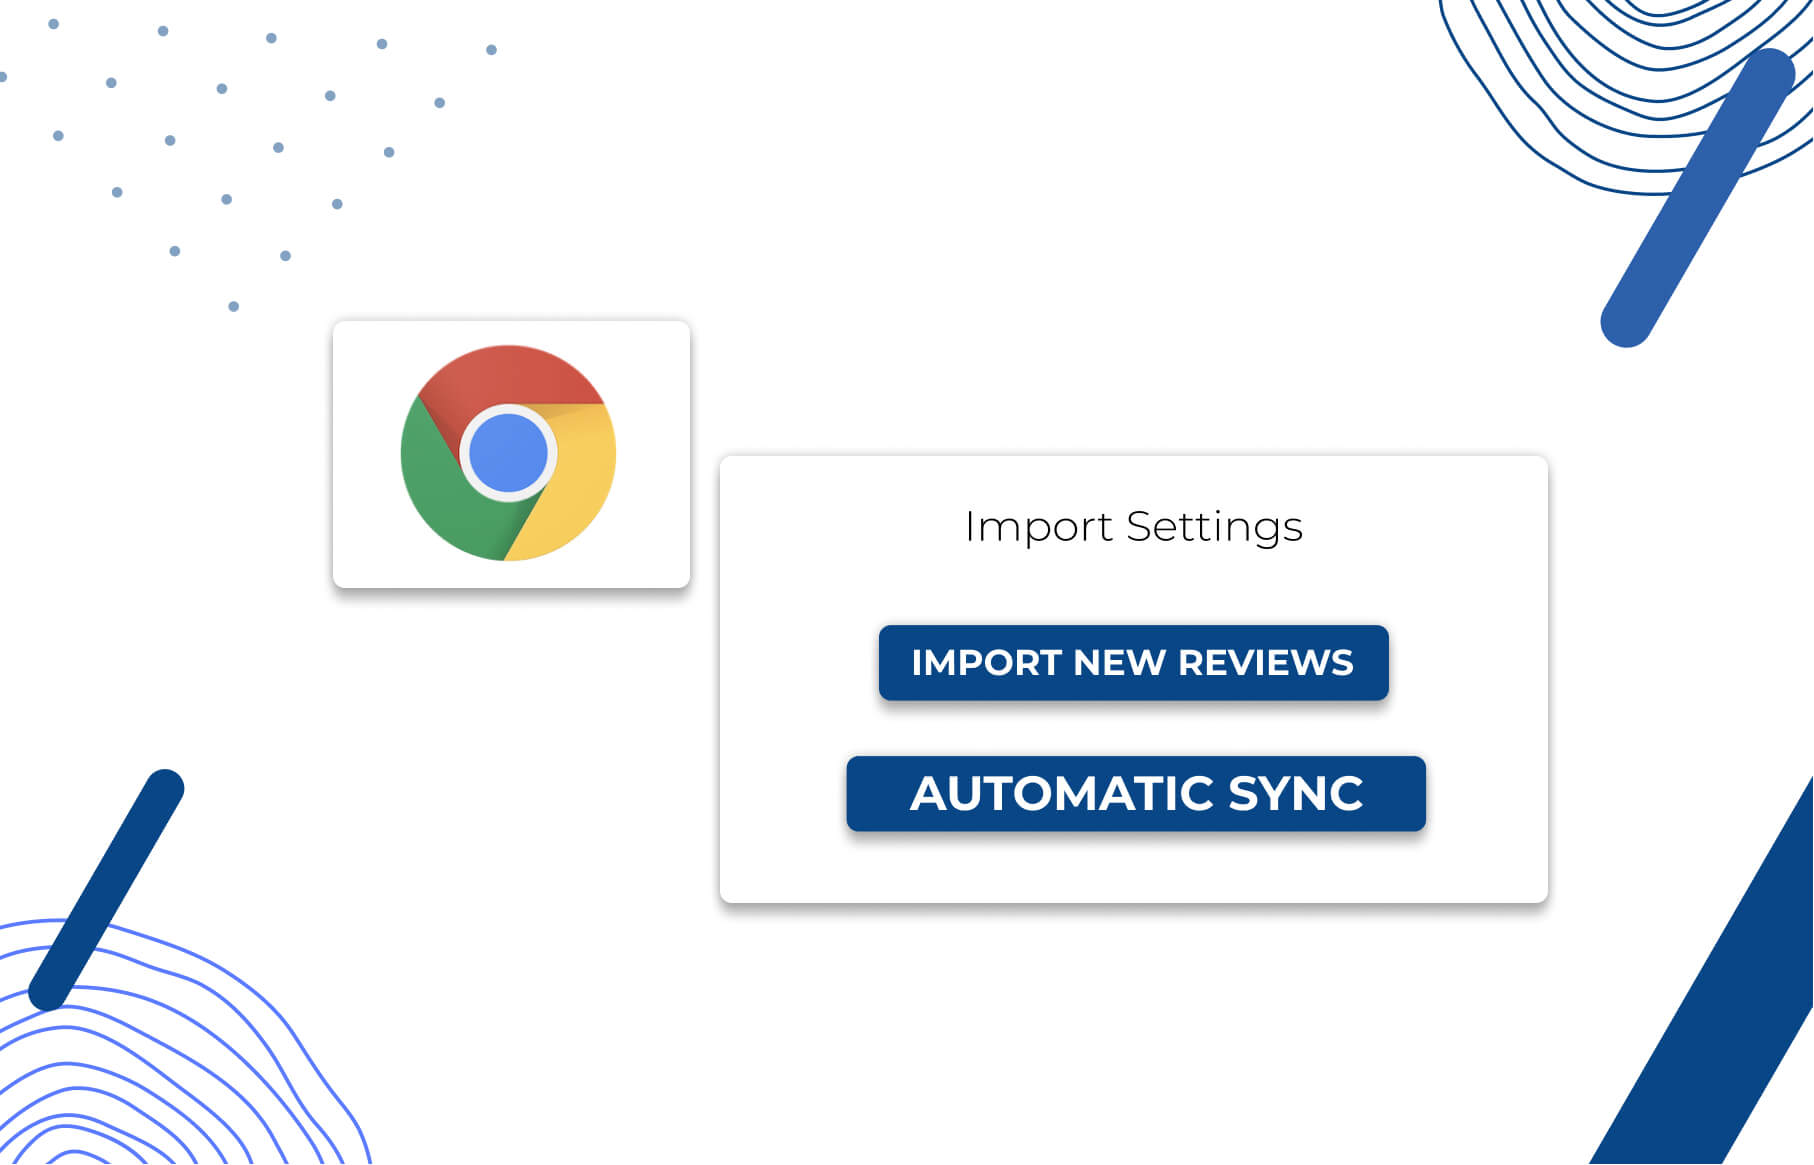 Opinew Google Chrome Extension: sync your reviews automatically or manually